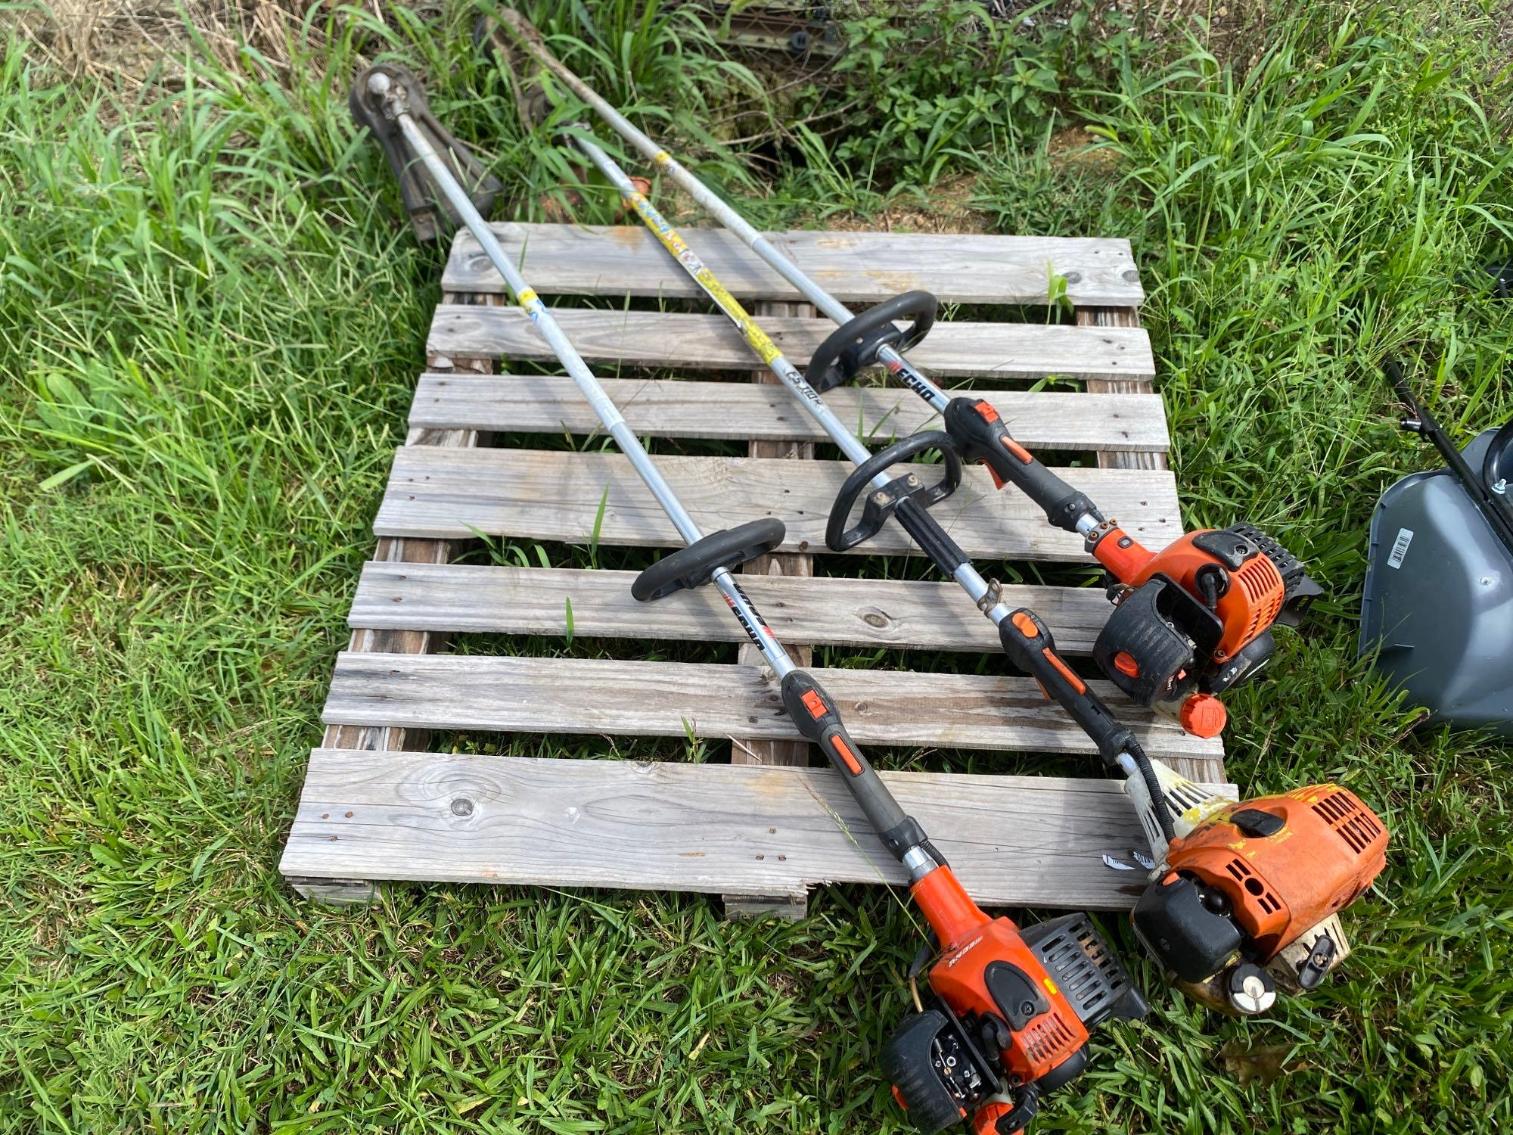 Image for Pallet- 3 Weed Eaters, 1 Stihl, 2 Echo, unsure of running condition